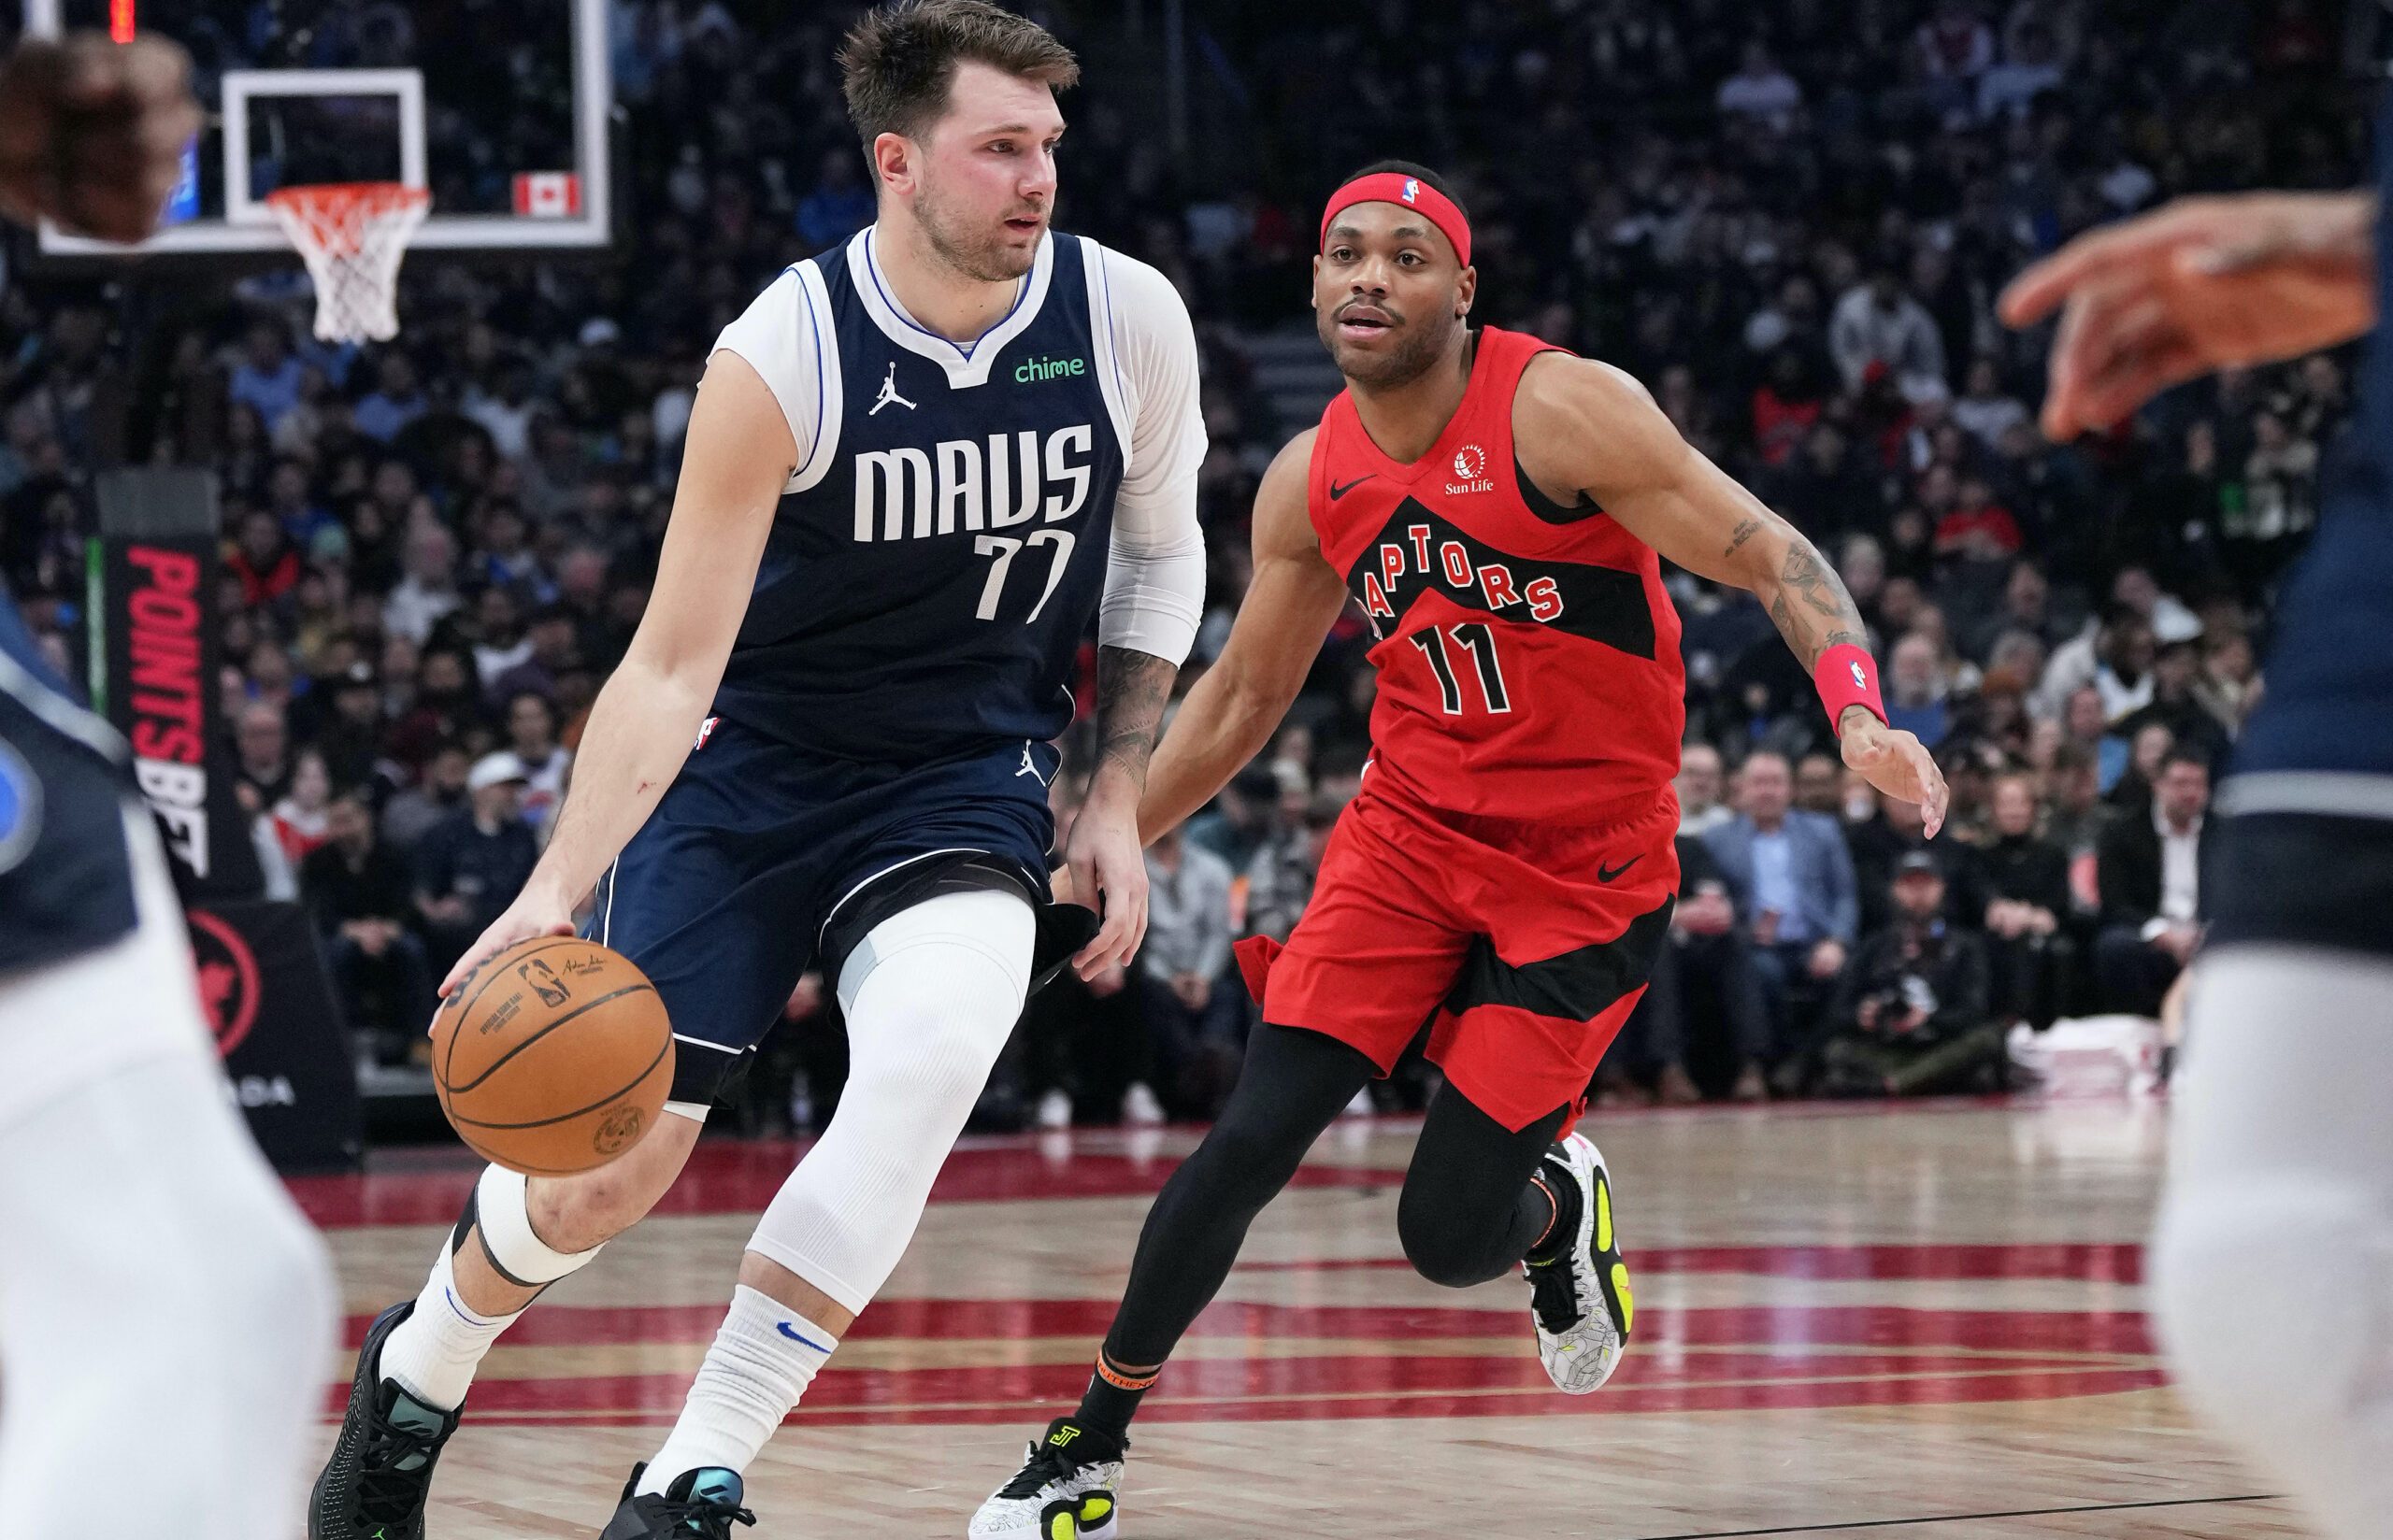 Triple-double party: Doncic, Jokic all-around threats in big wins